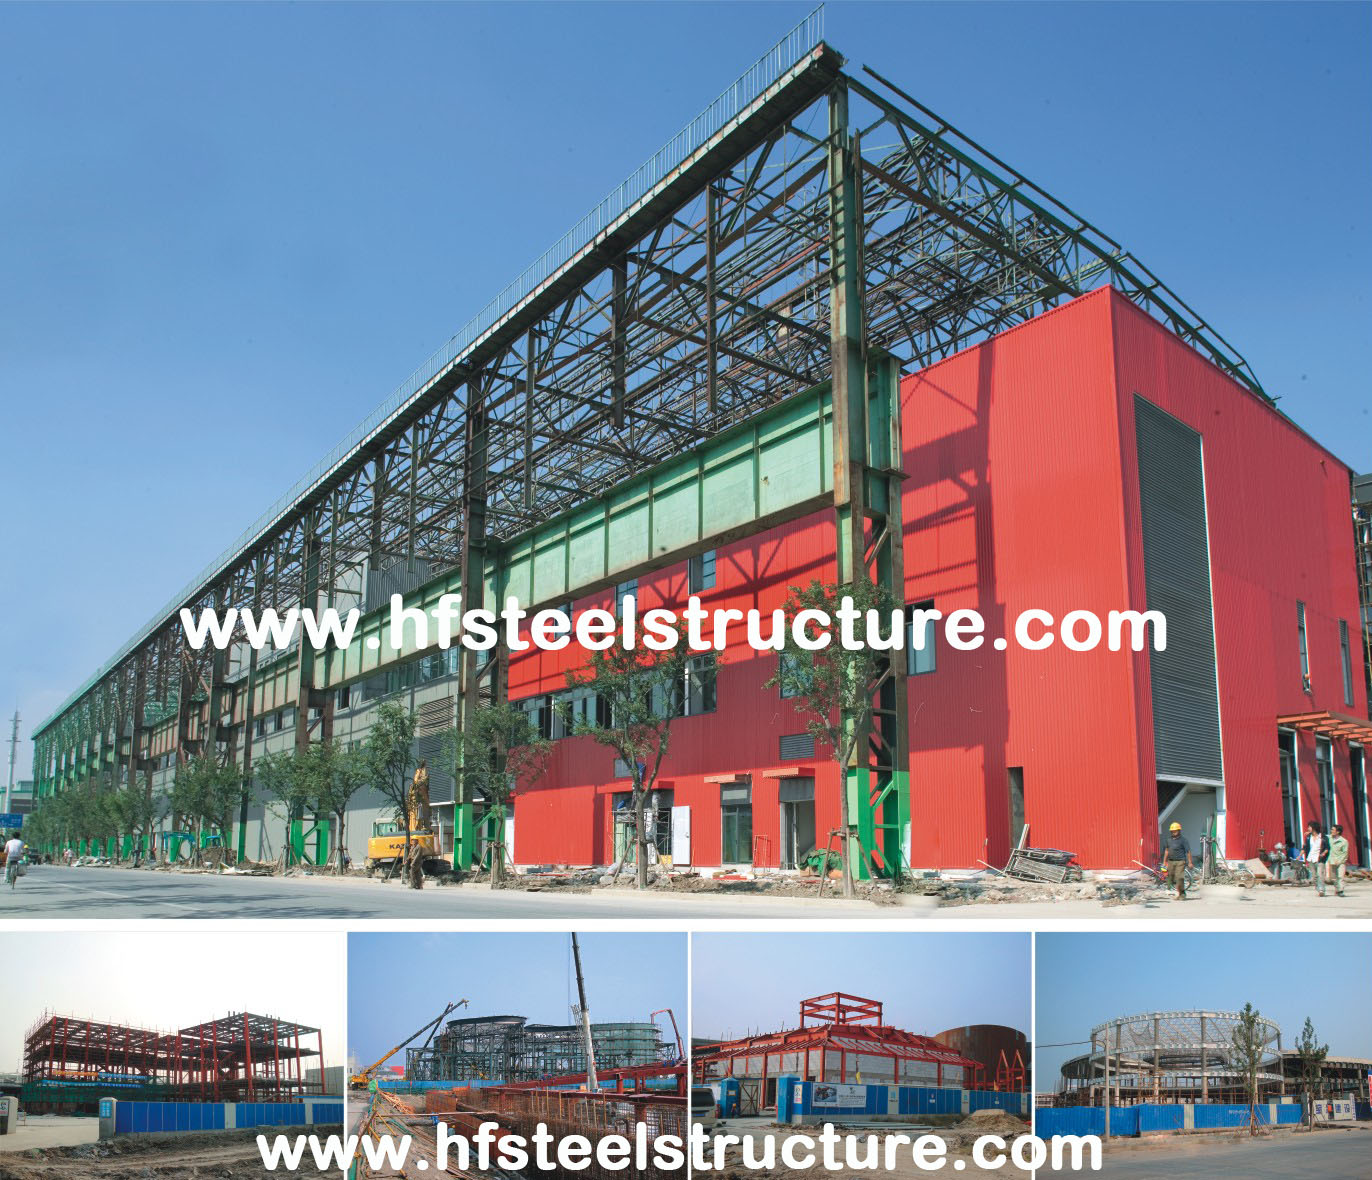 Plasma And Oxyfuel Cutting, Fire Proof And Rust Proof Commercial Steel Buildings